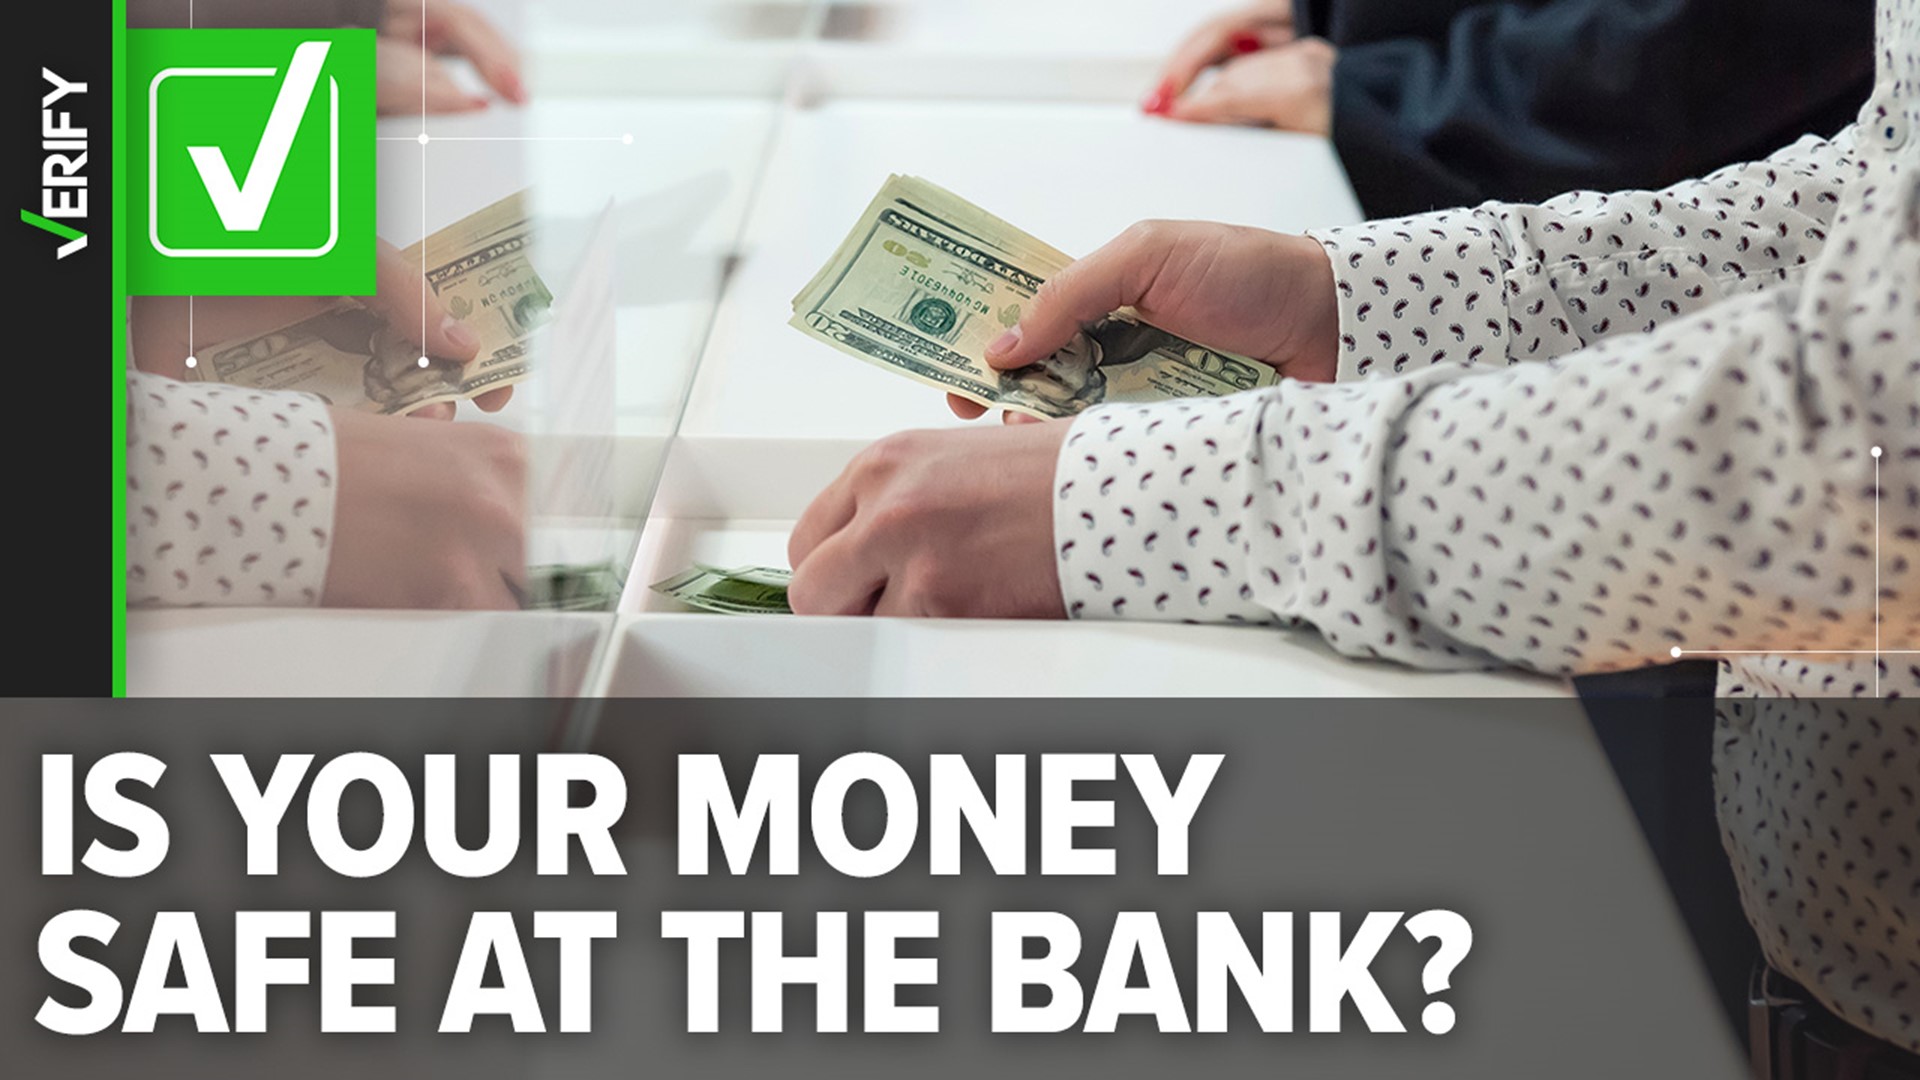 If you have more than $250,000 in one account, our experts recommend shifting it into different accounts or moving some of the excess money to a different bank.